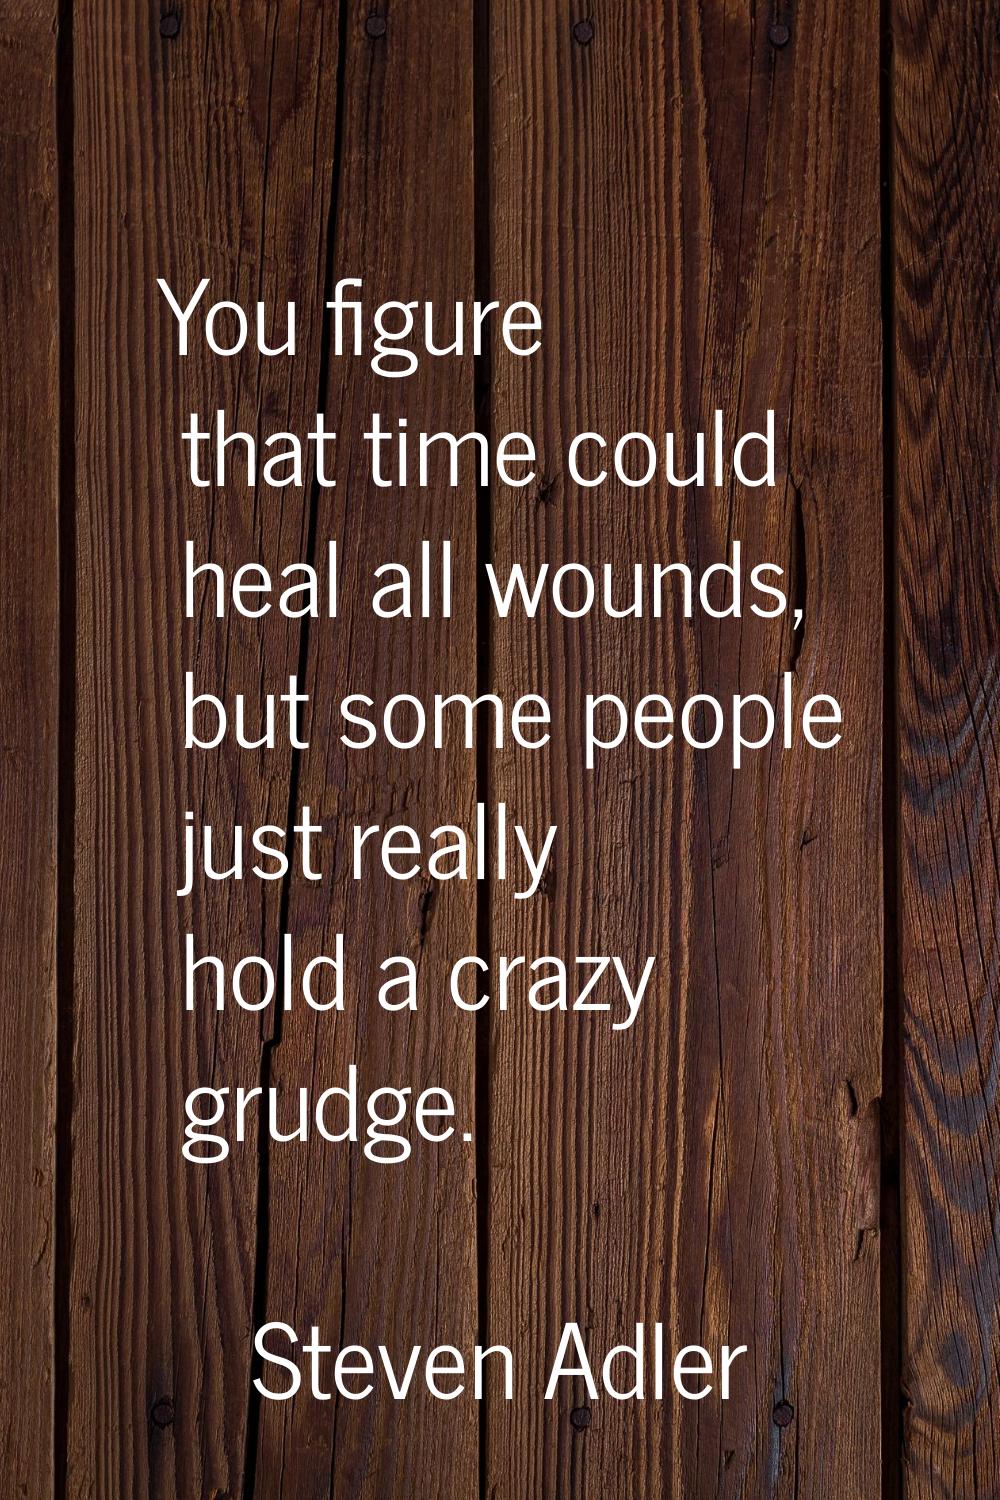 You figure that time could heal all wounds, but some people just really hold a crazy grudge.